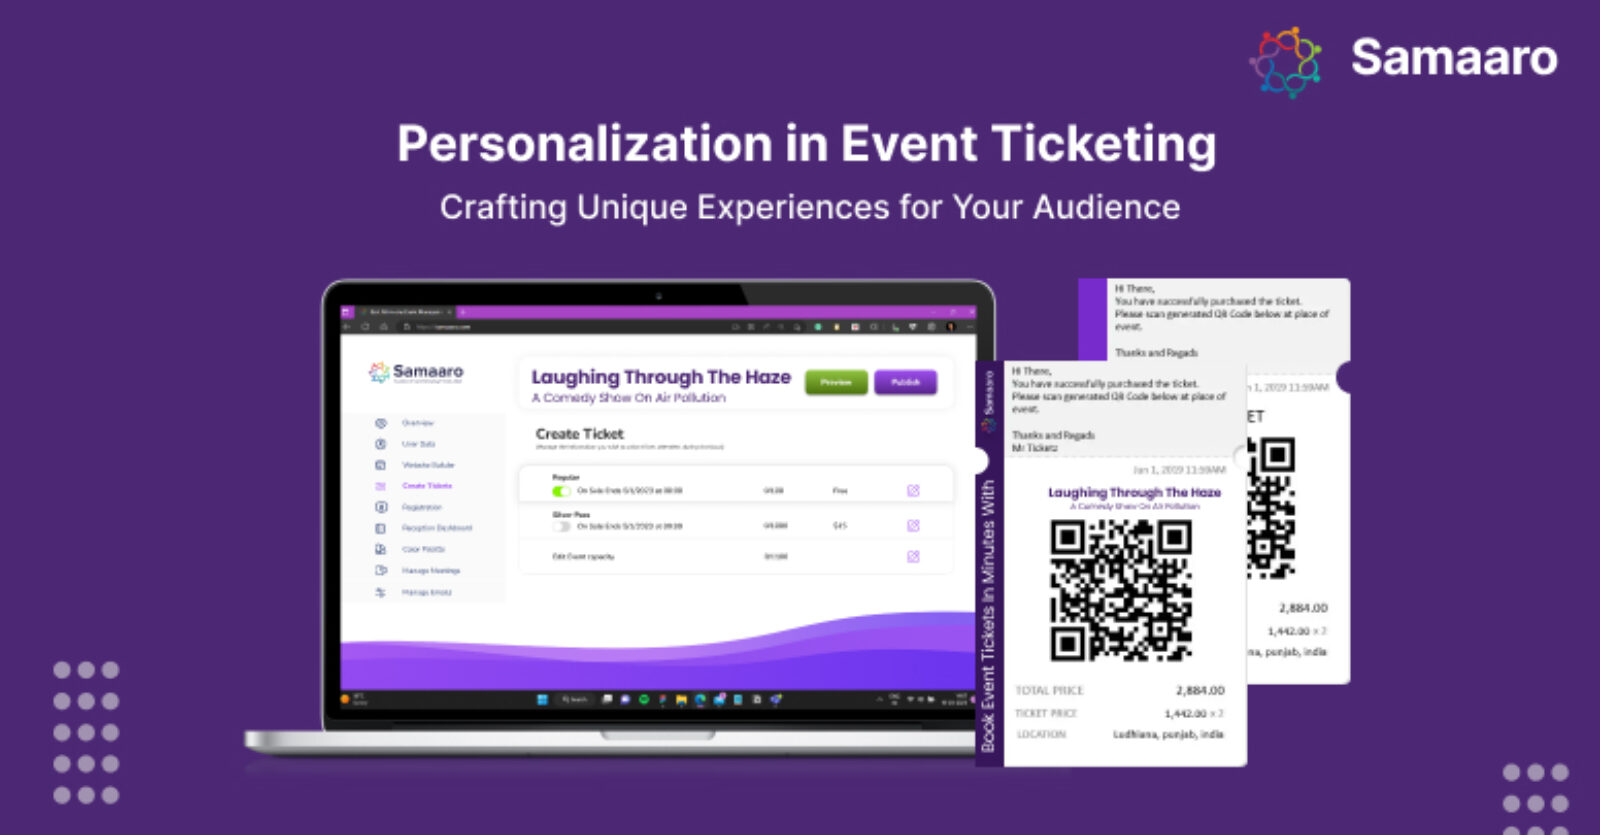 Personalization in Event Ticketing: Crafting Unique Experiences for Your Audience 